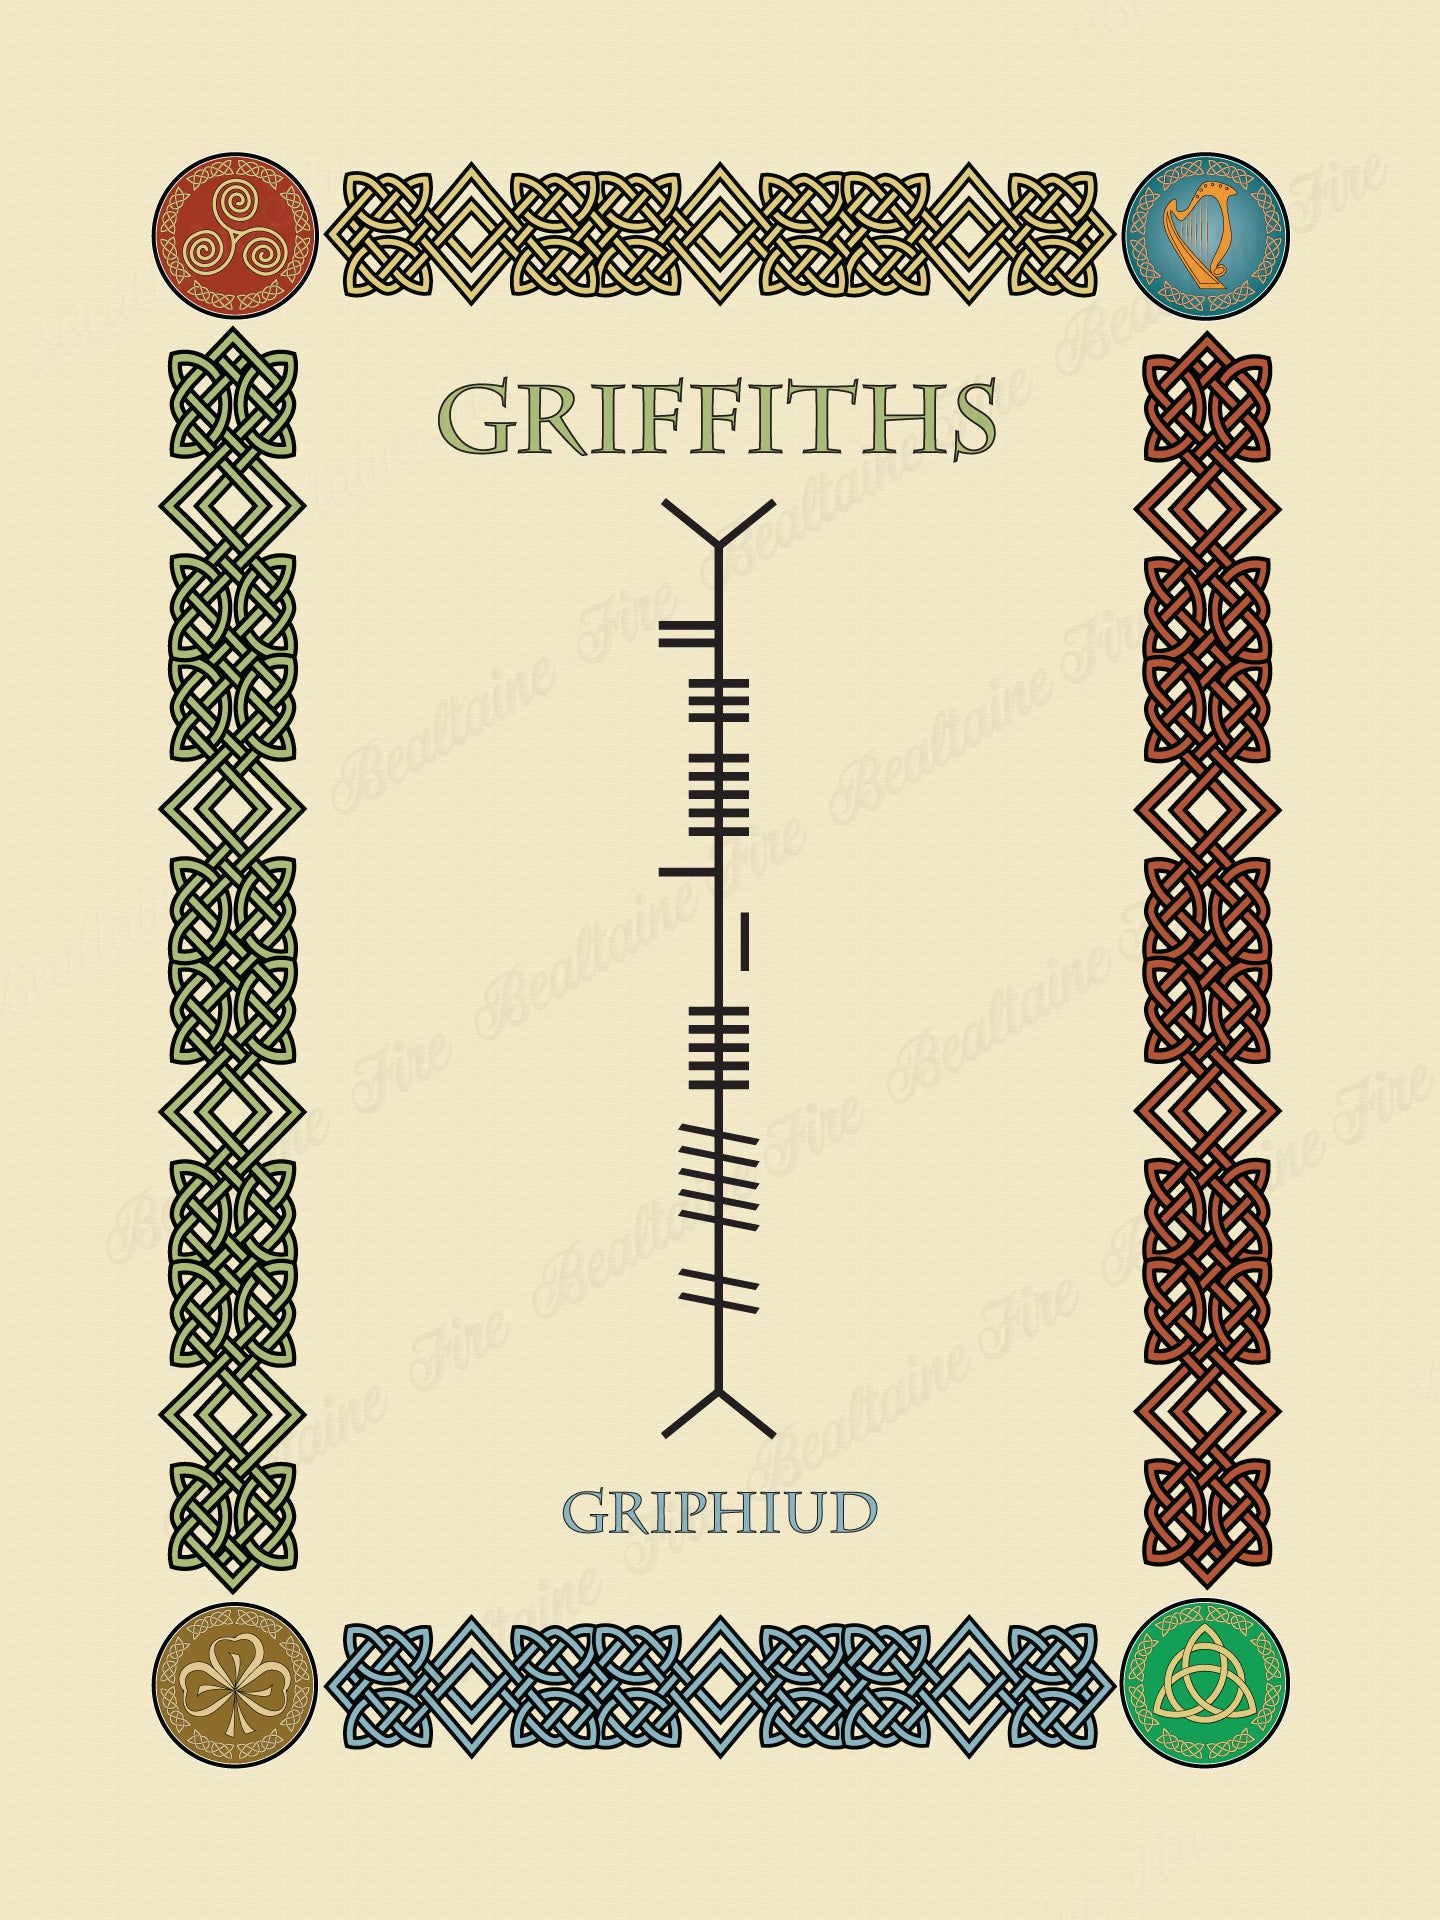 Griffiths in Old Irish and Ogham - PDF Download